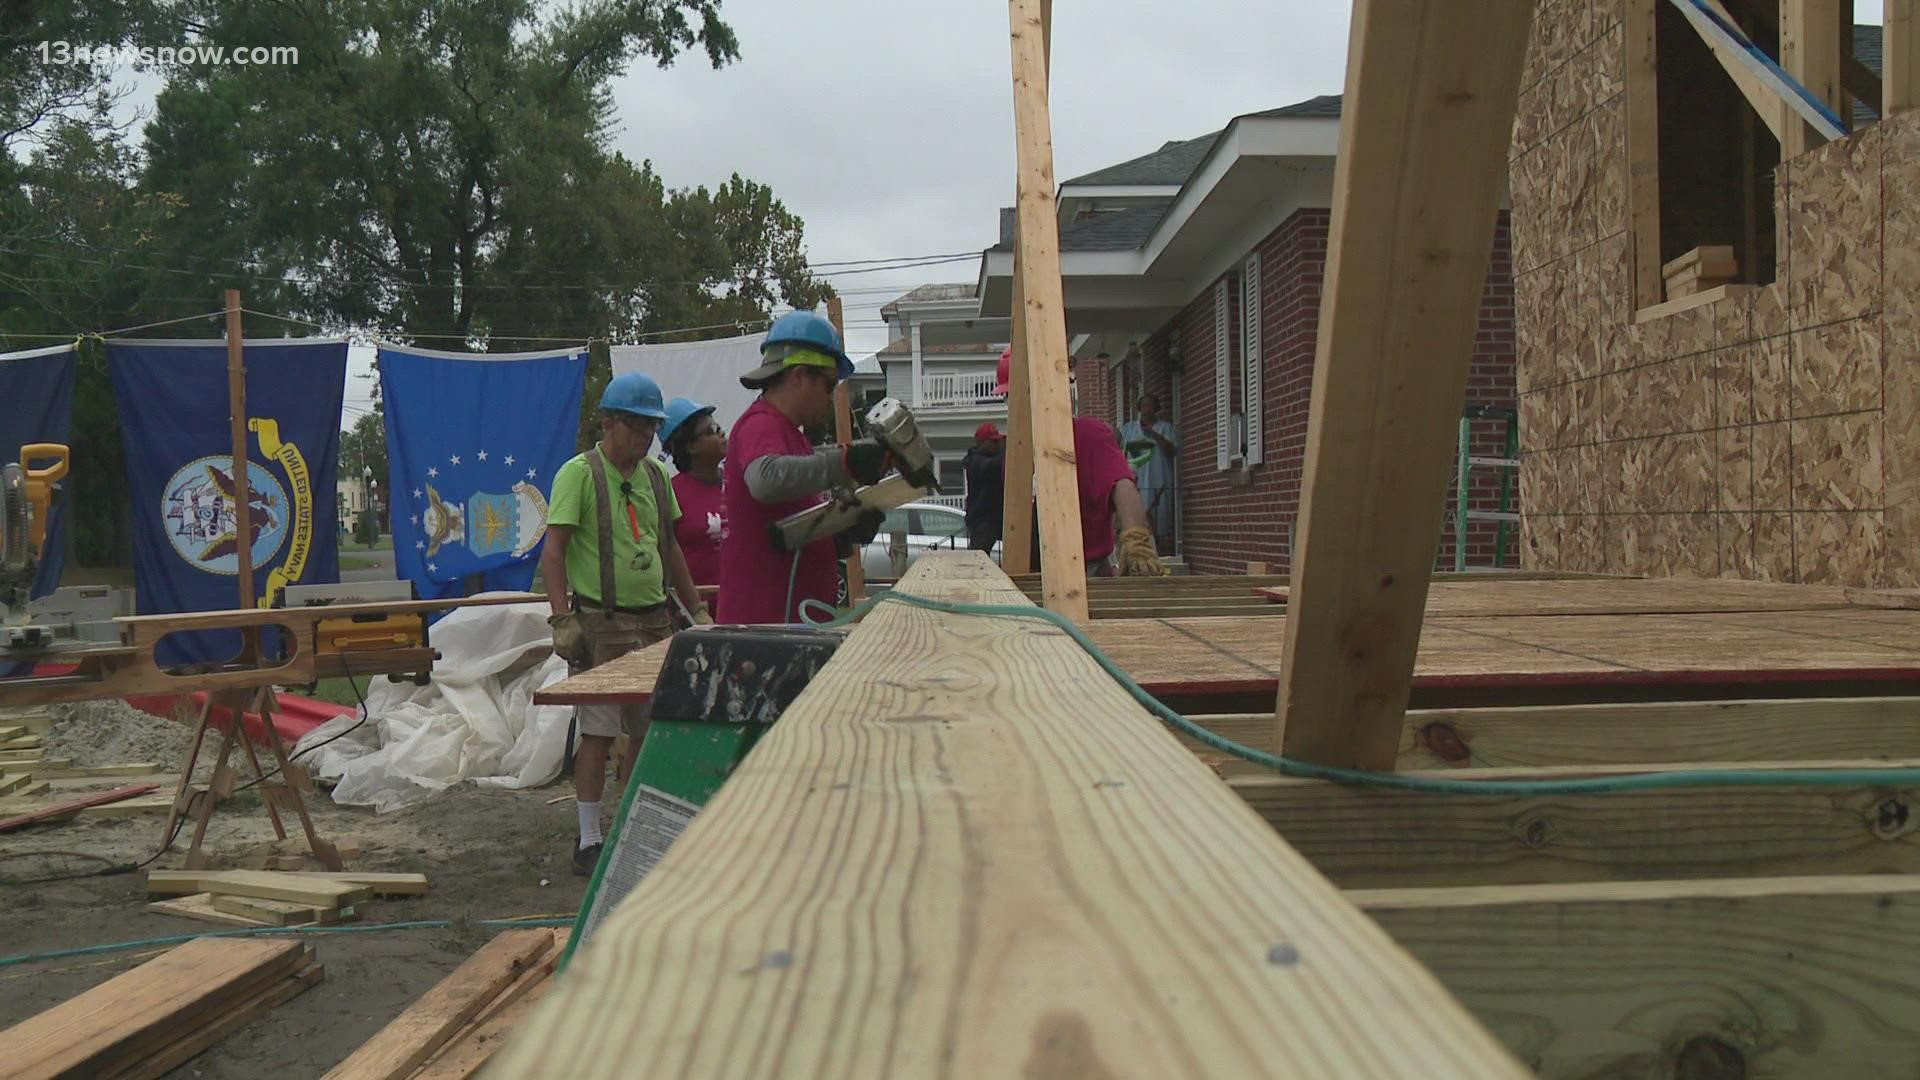 Frontline Heroes Build Week will allow teams of healthcare heroes to come together and raise money for Habitat for Humanity of South Hampton Roads.